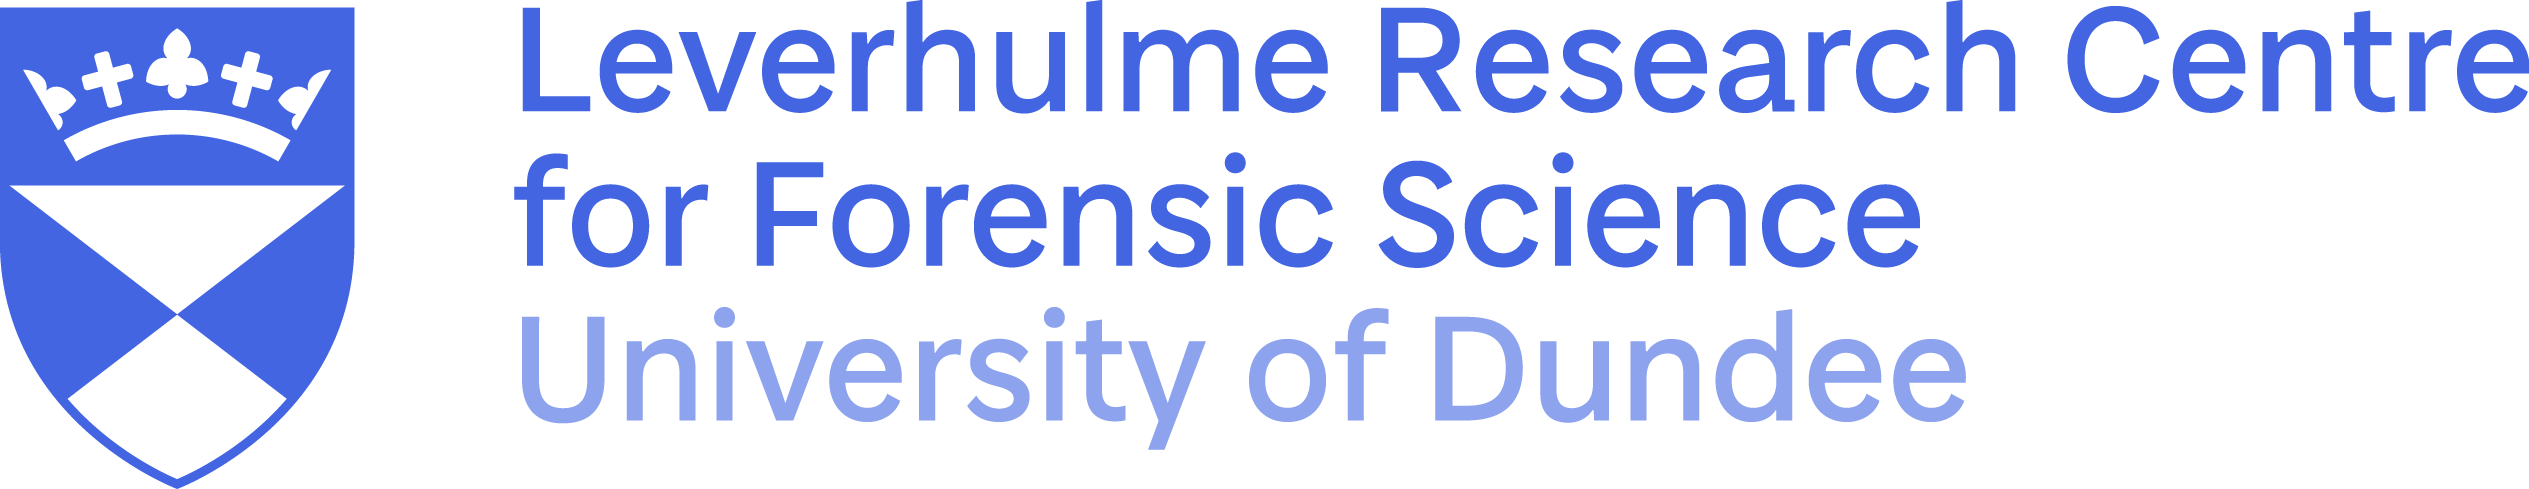 Leverhulme Research Centre for Forensic Science logo